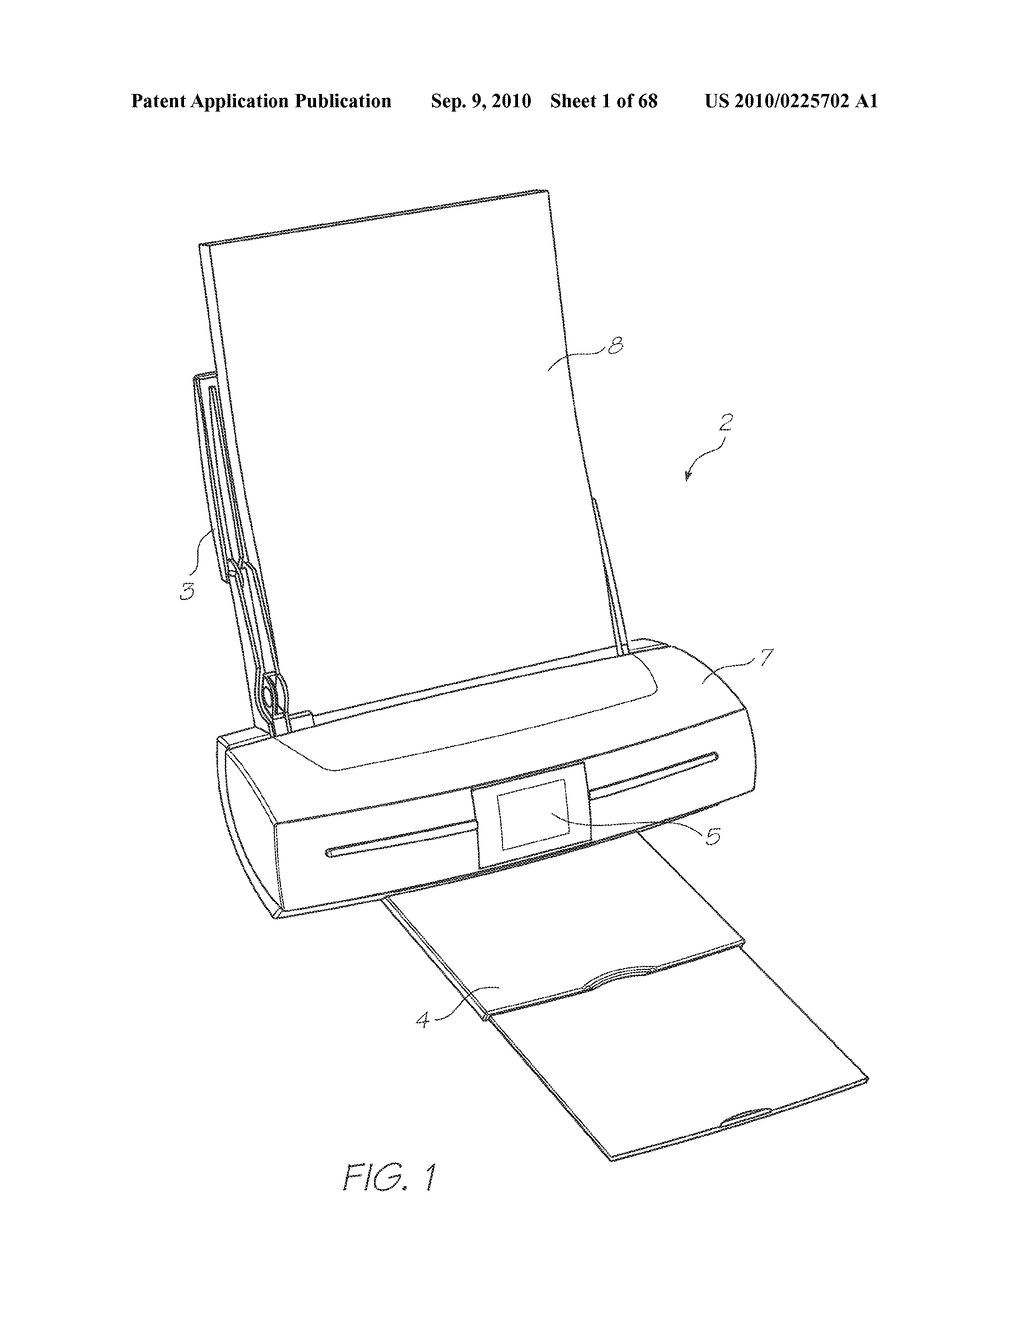 Printhead Assembly Incorporating Plural Printhead Integrated Circuits Sealed To Support Member With Polymer Sealing Film - diagram, schematic, and image 02